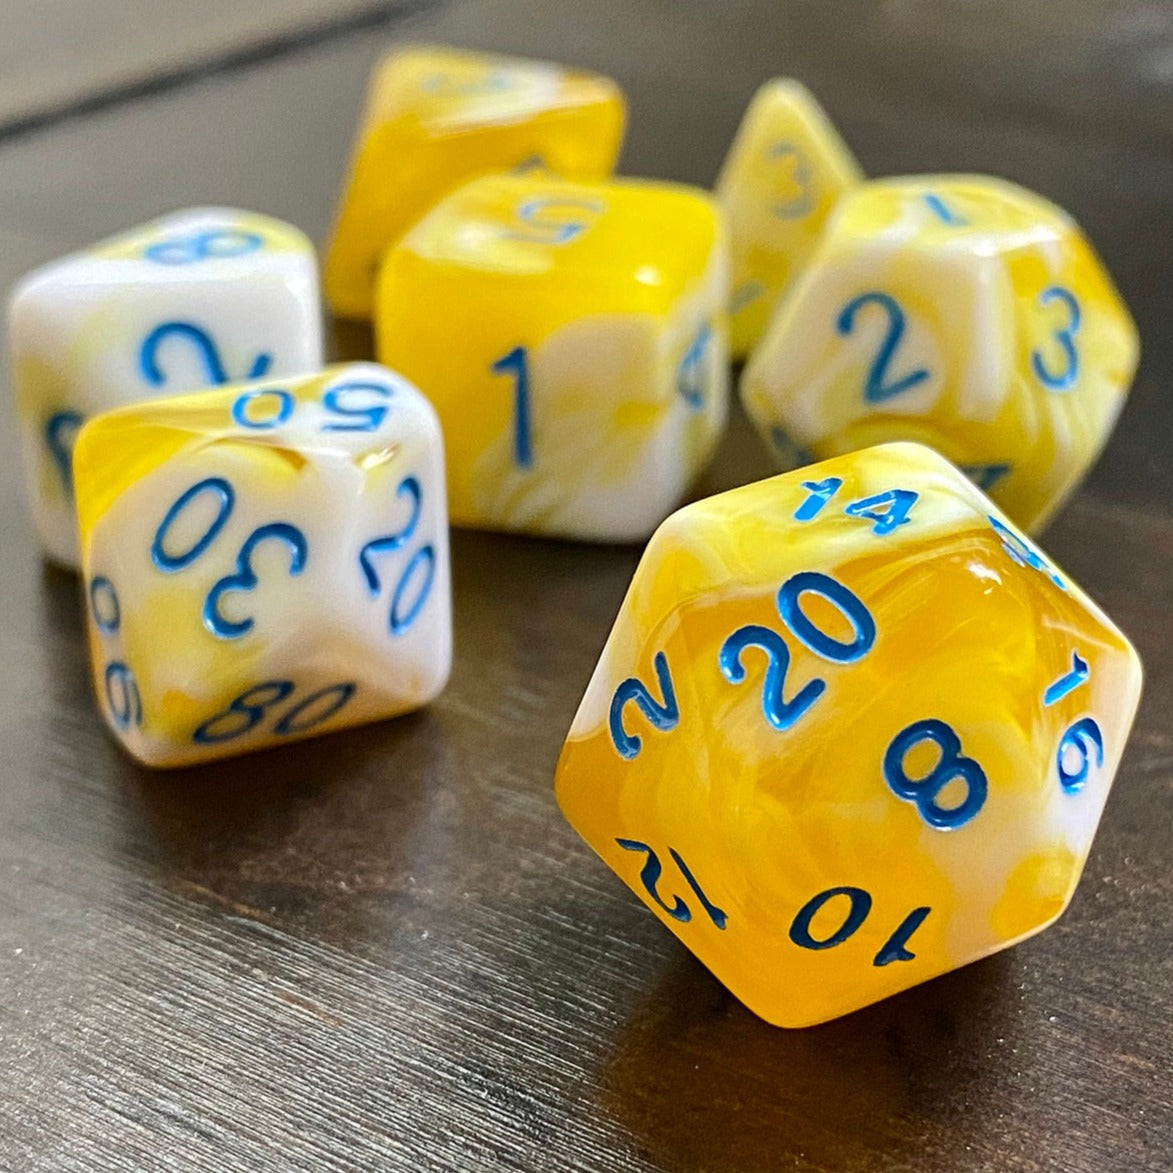 FREE Today: MELTED BUTTER DnD Dice Set